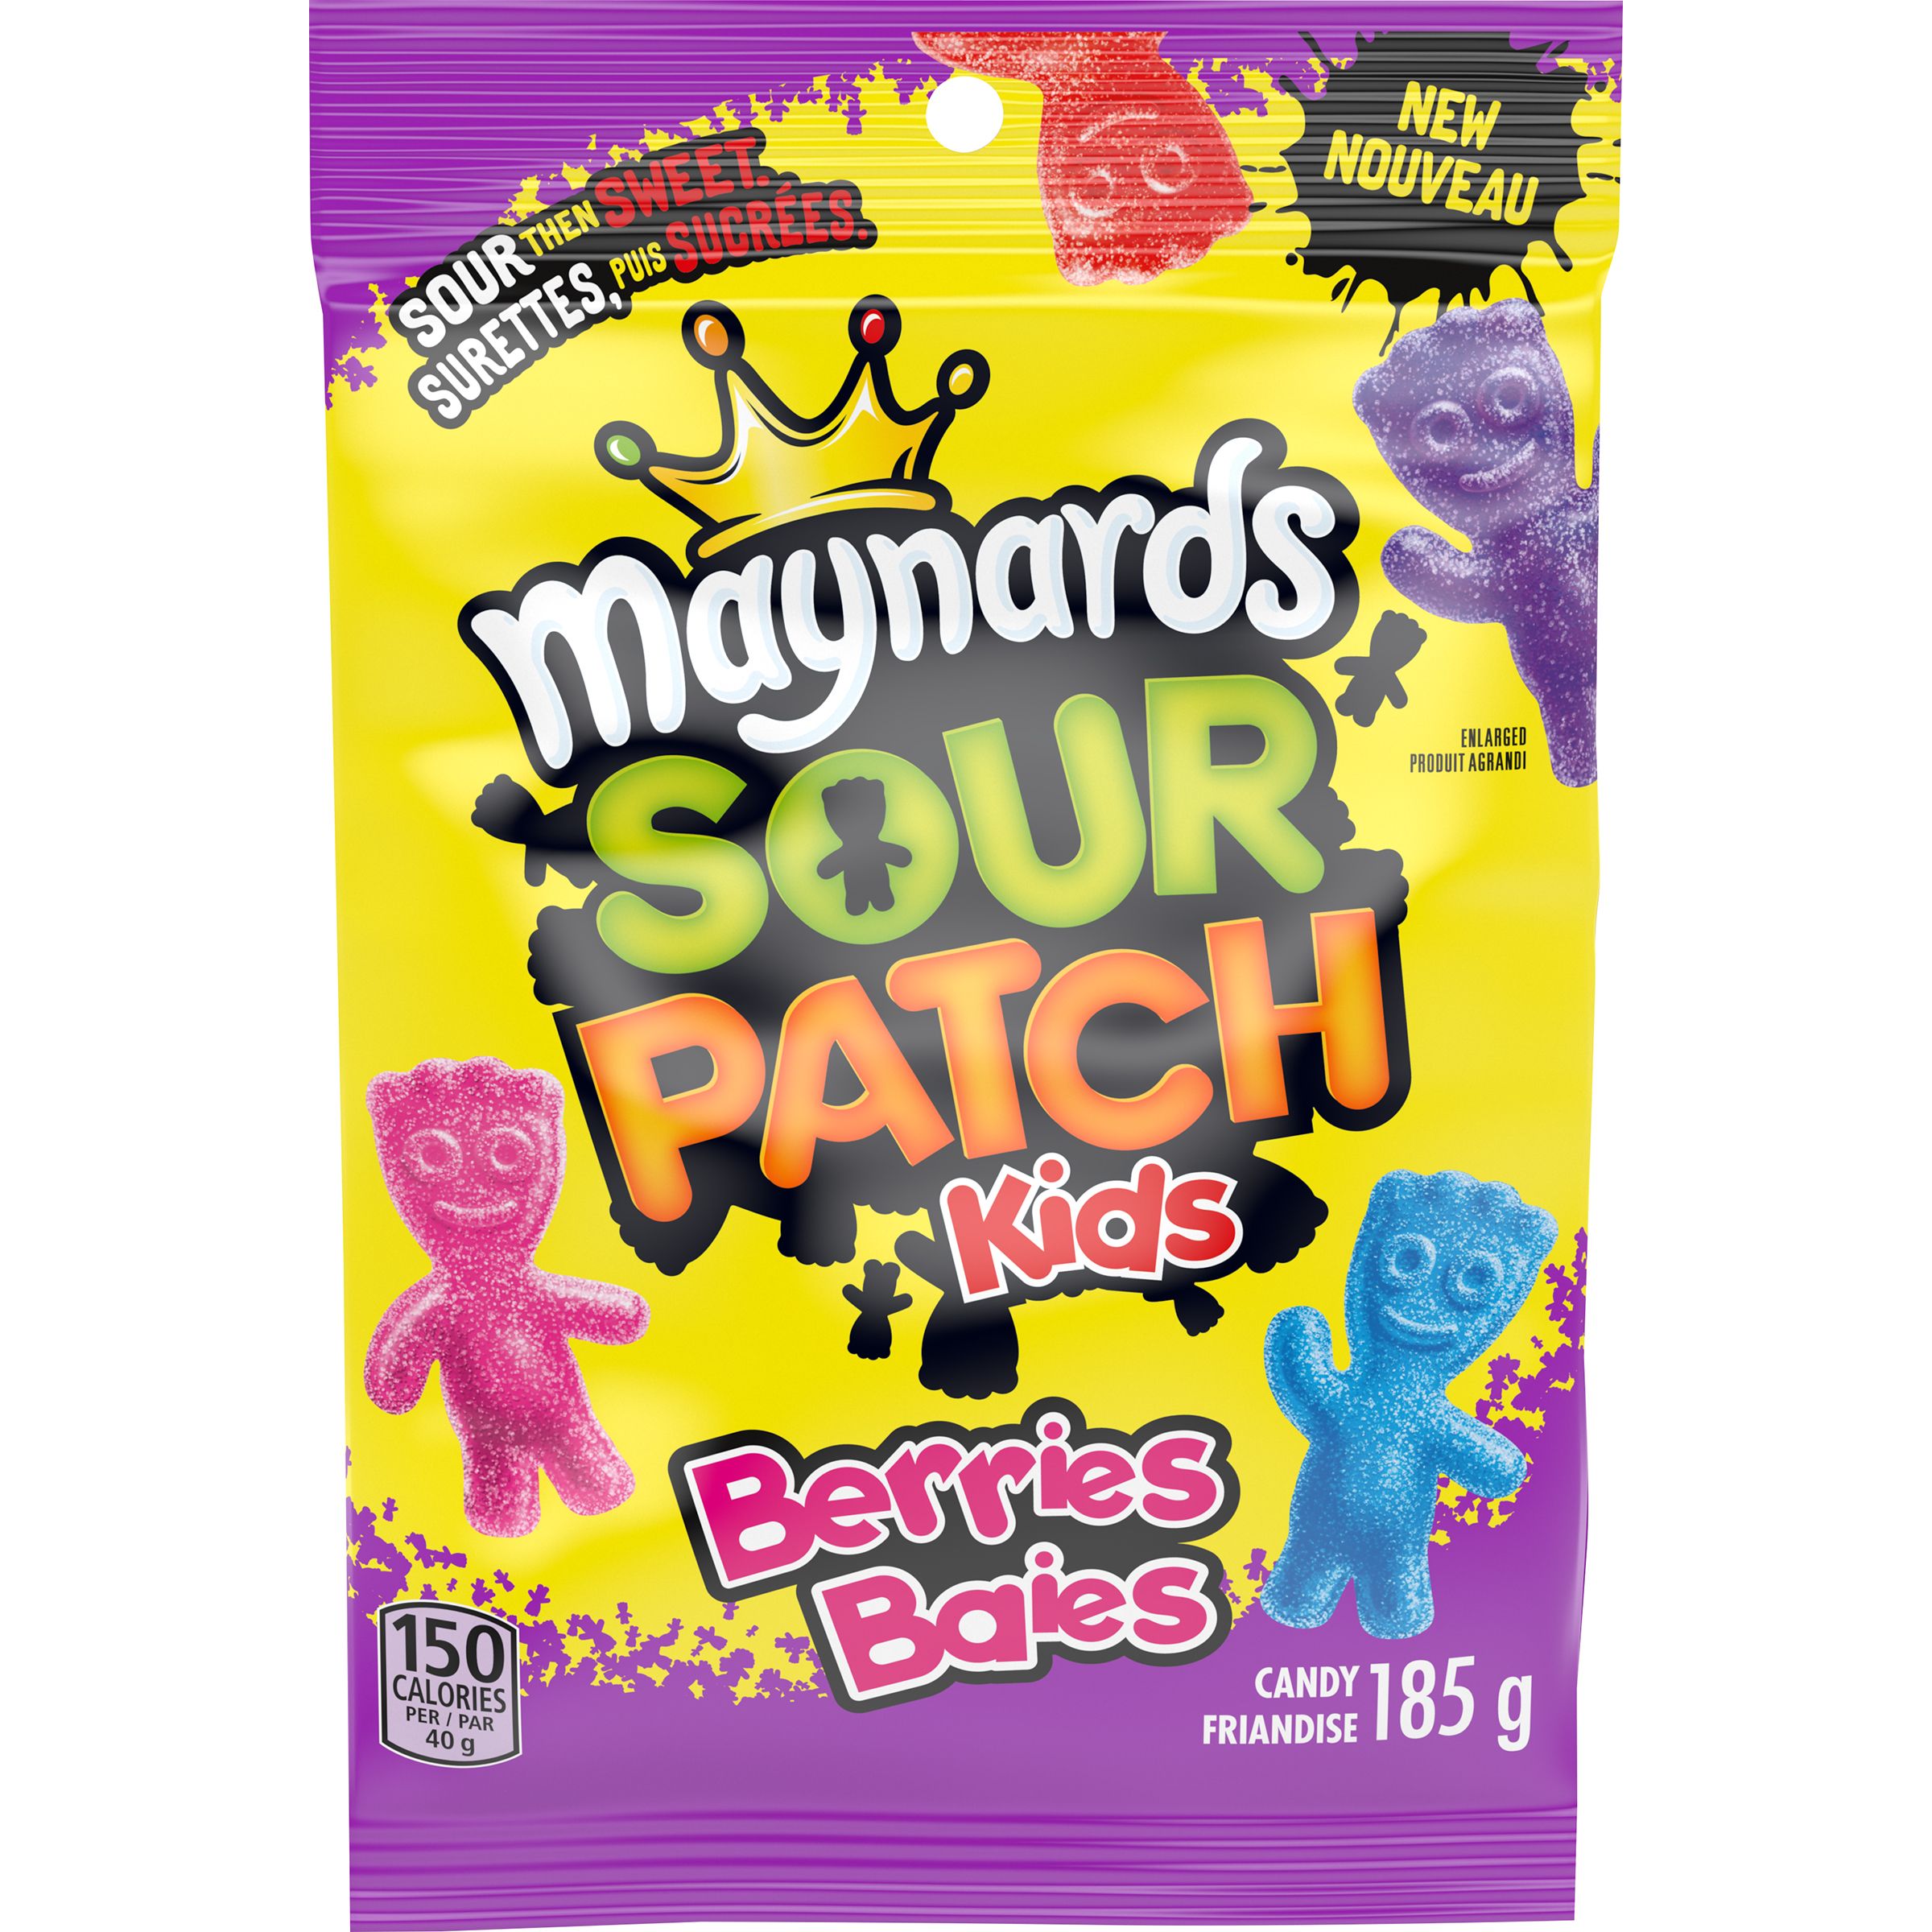 Maynards Sour Patch Kids Berries Candy, 185G-1